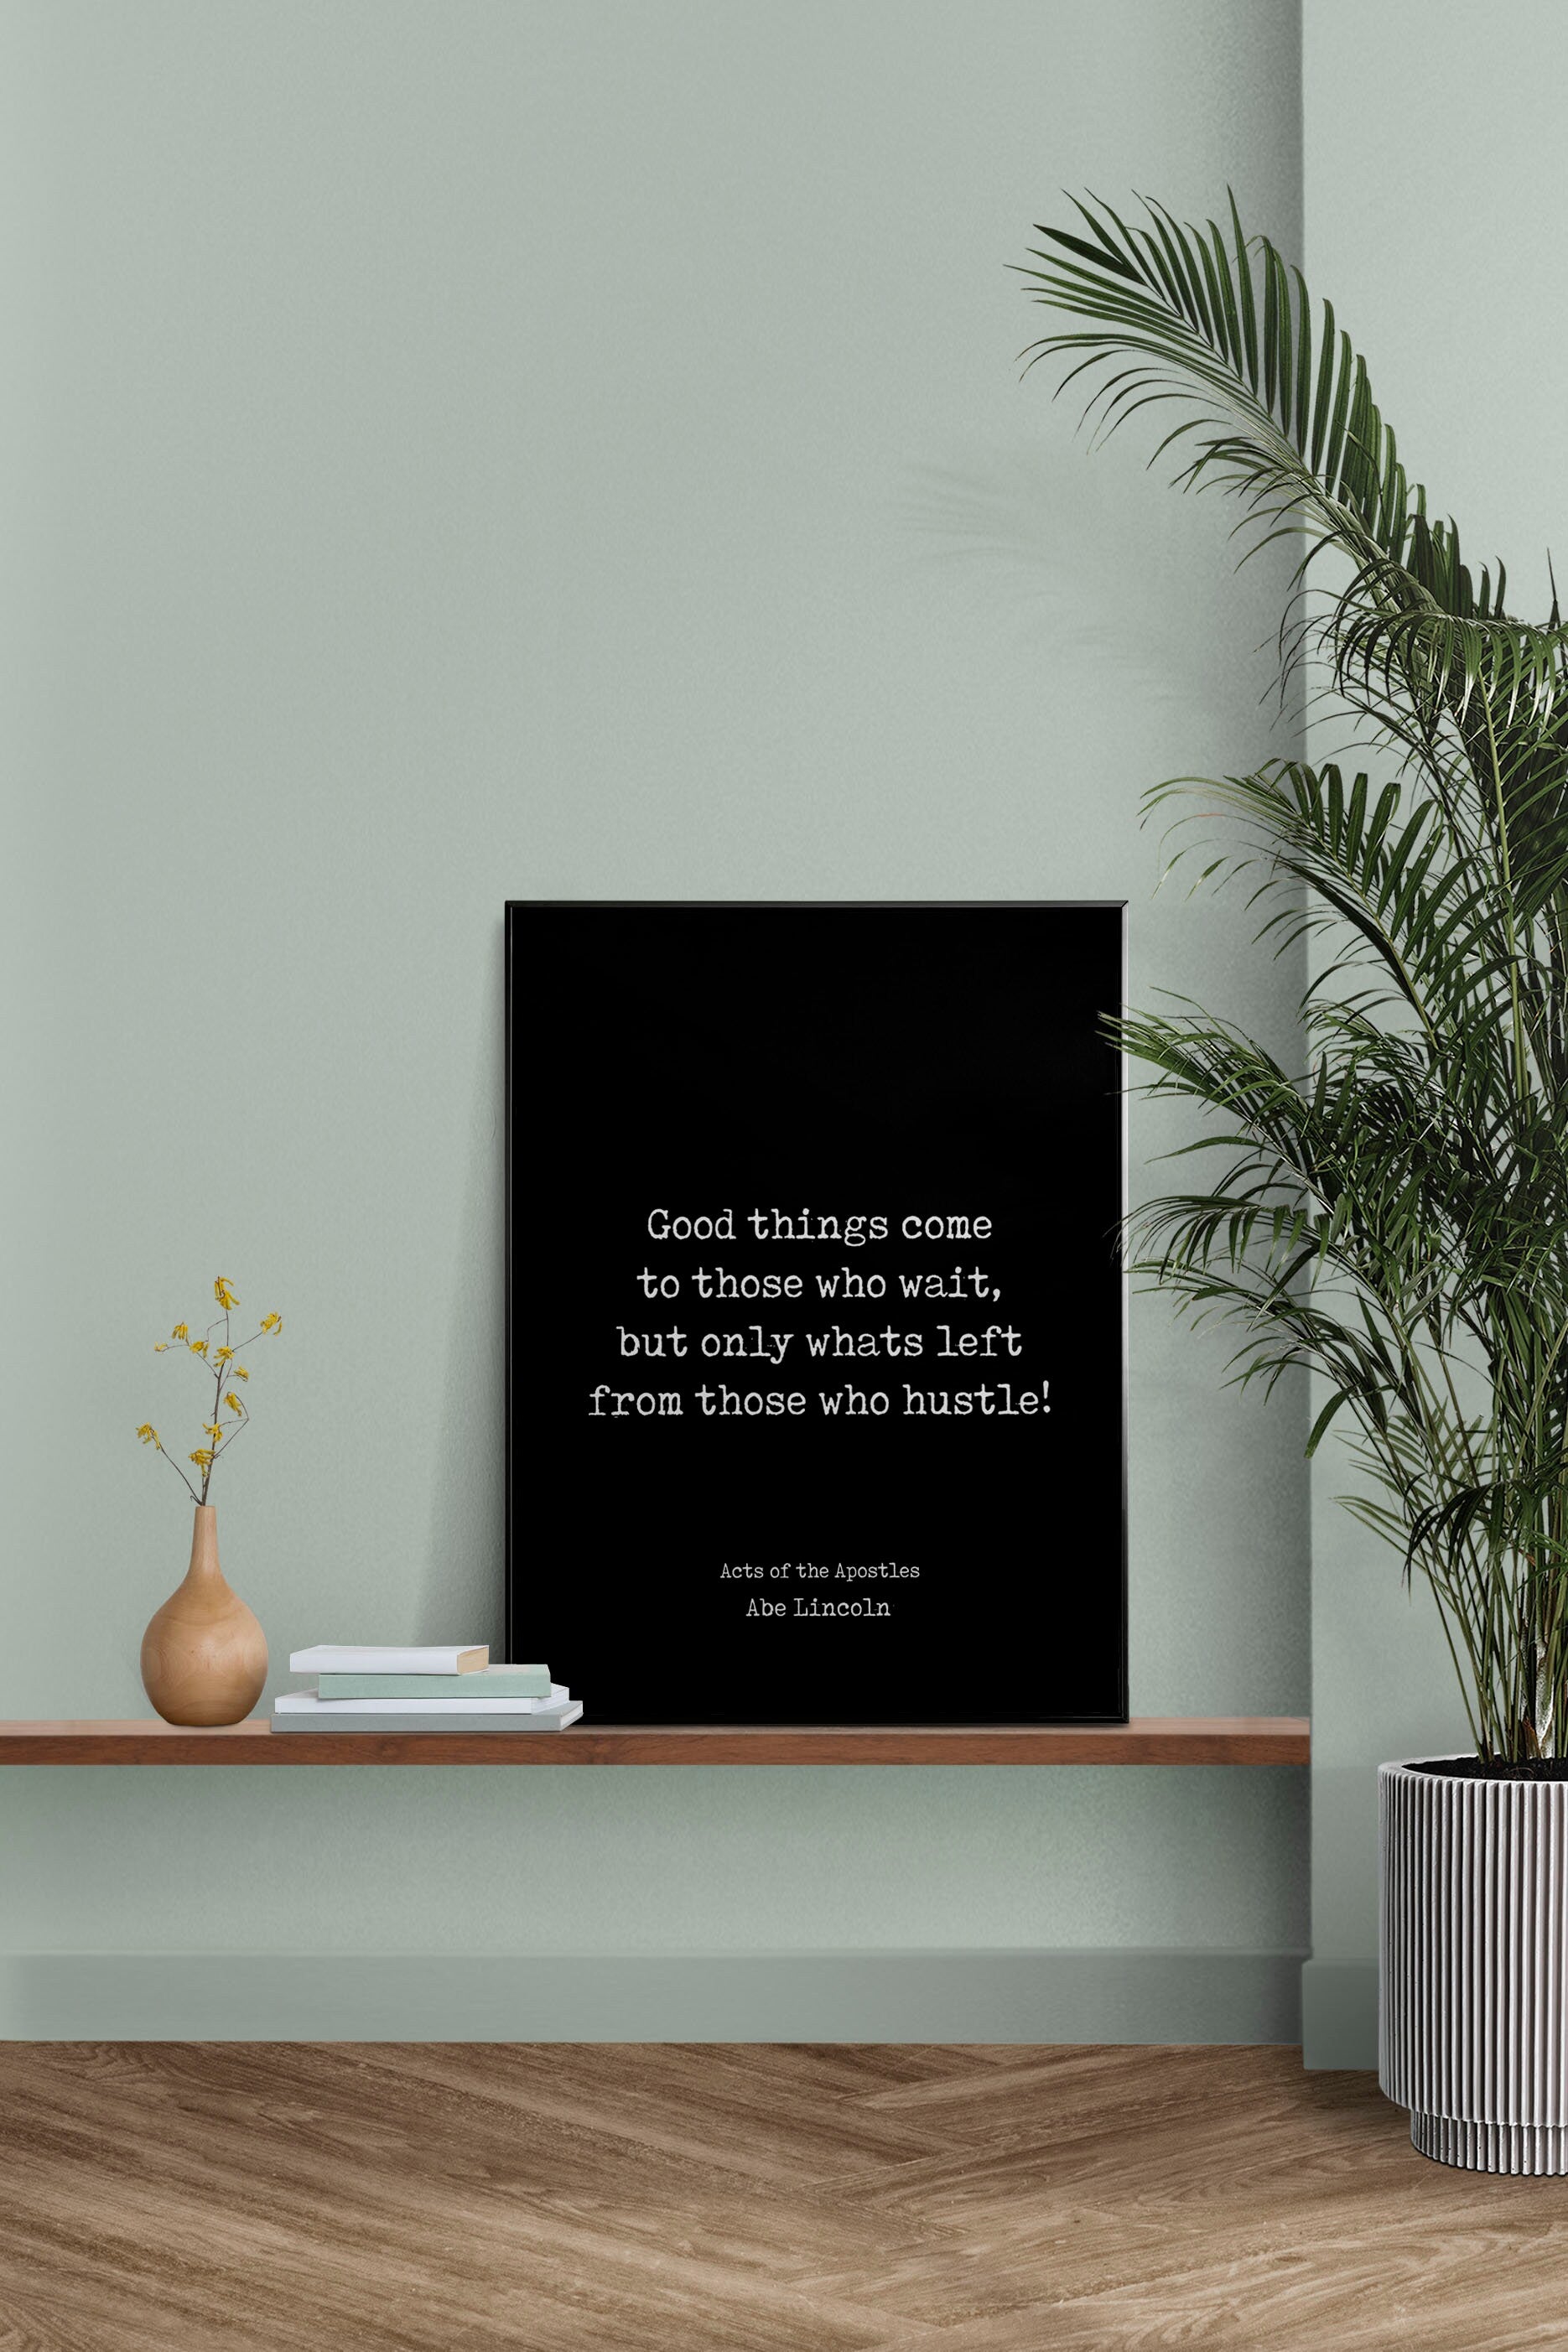 Abe Lincoln Literary Quote Print Good Things Come To Those Who Wait, Inspirational Black & White or Vintage Art Decor Unframed or Framed Art